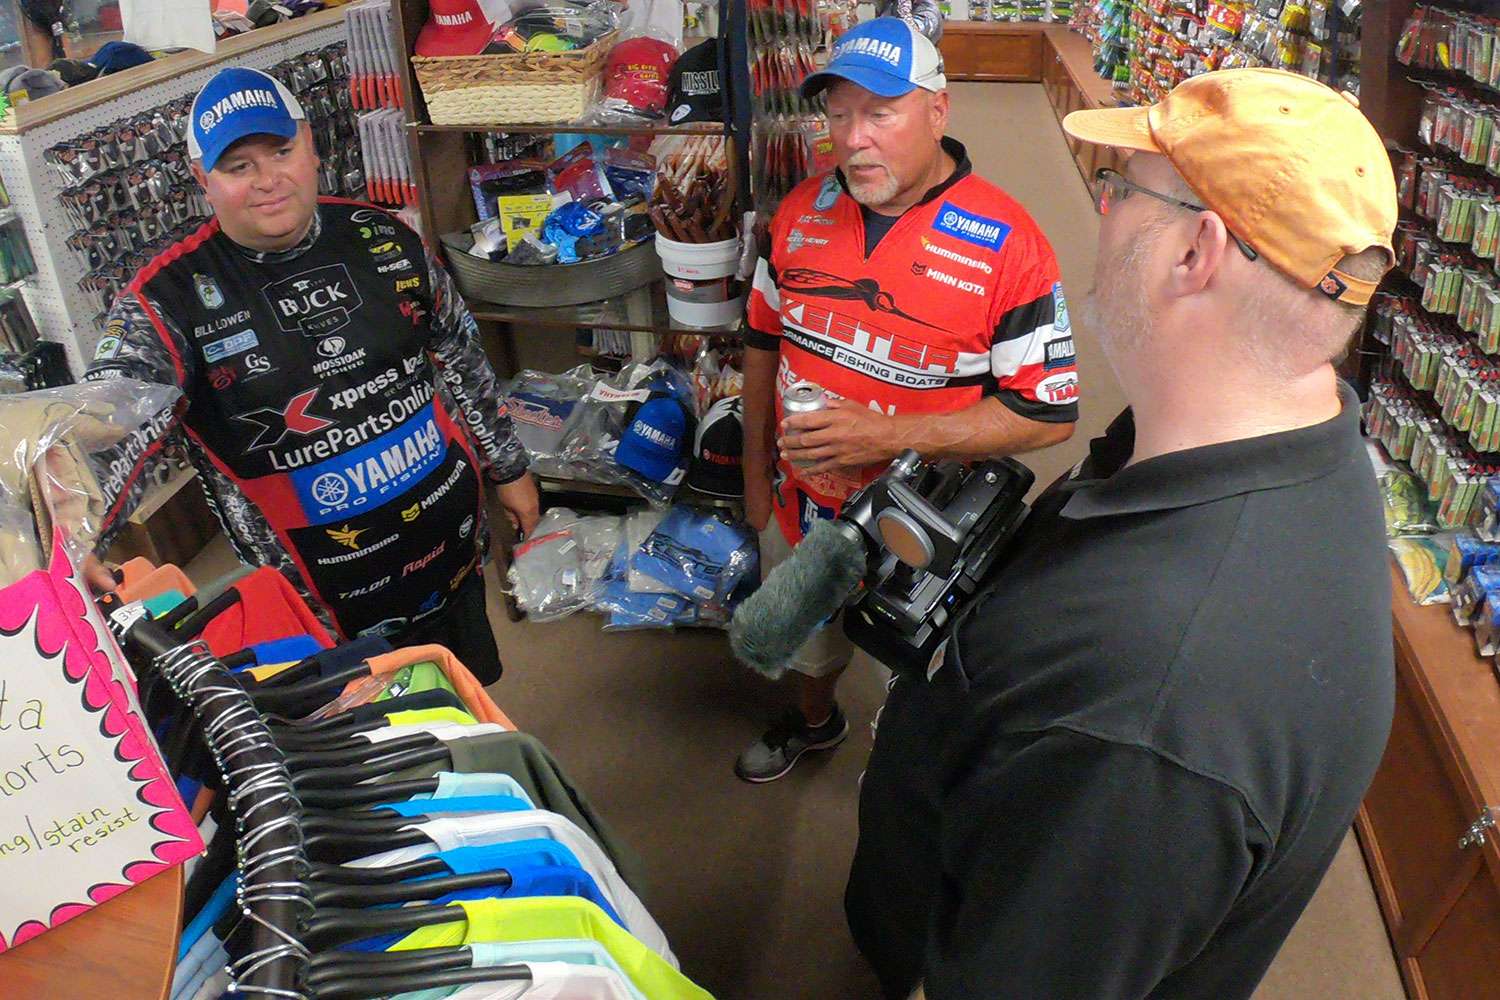 No telling what kind of lies are being told here. Bassmaster.com Managing Editor Chris Mitchell is getting some solid advice.